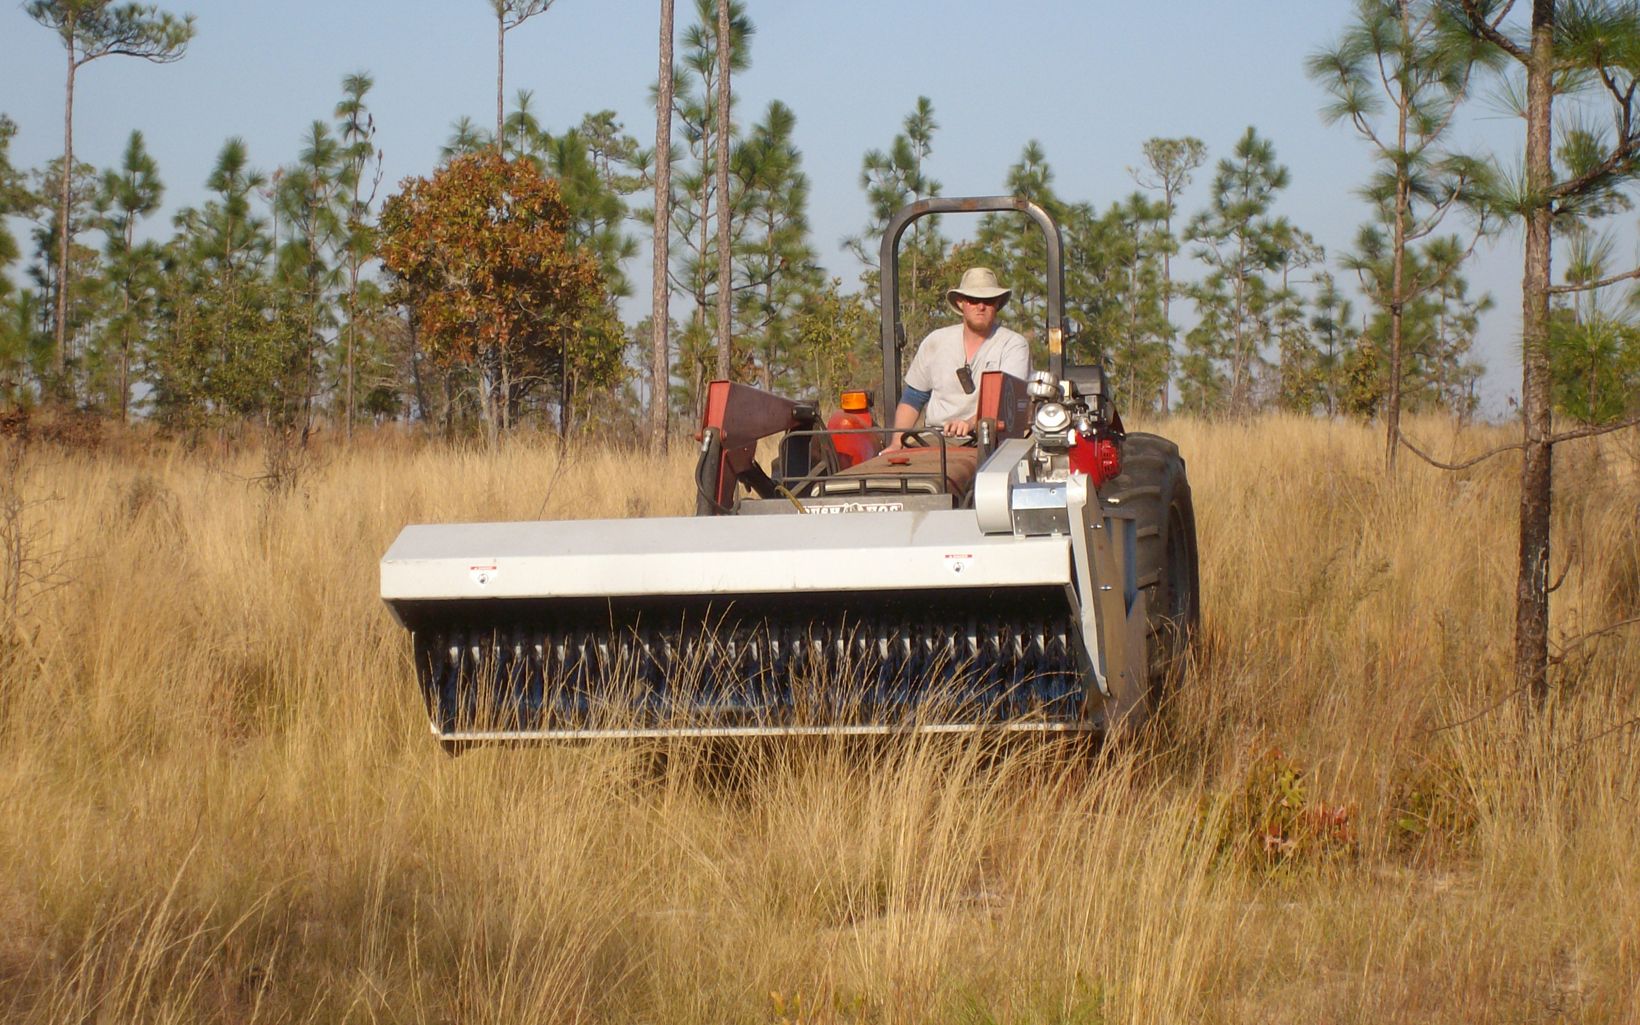 A tractor is used to collect native groundcover seed mix for future planting at Apalachicola Bluffs and Ravines Preserve.